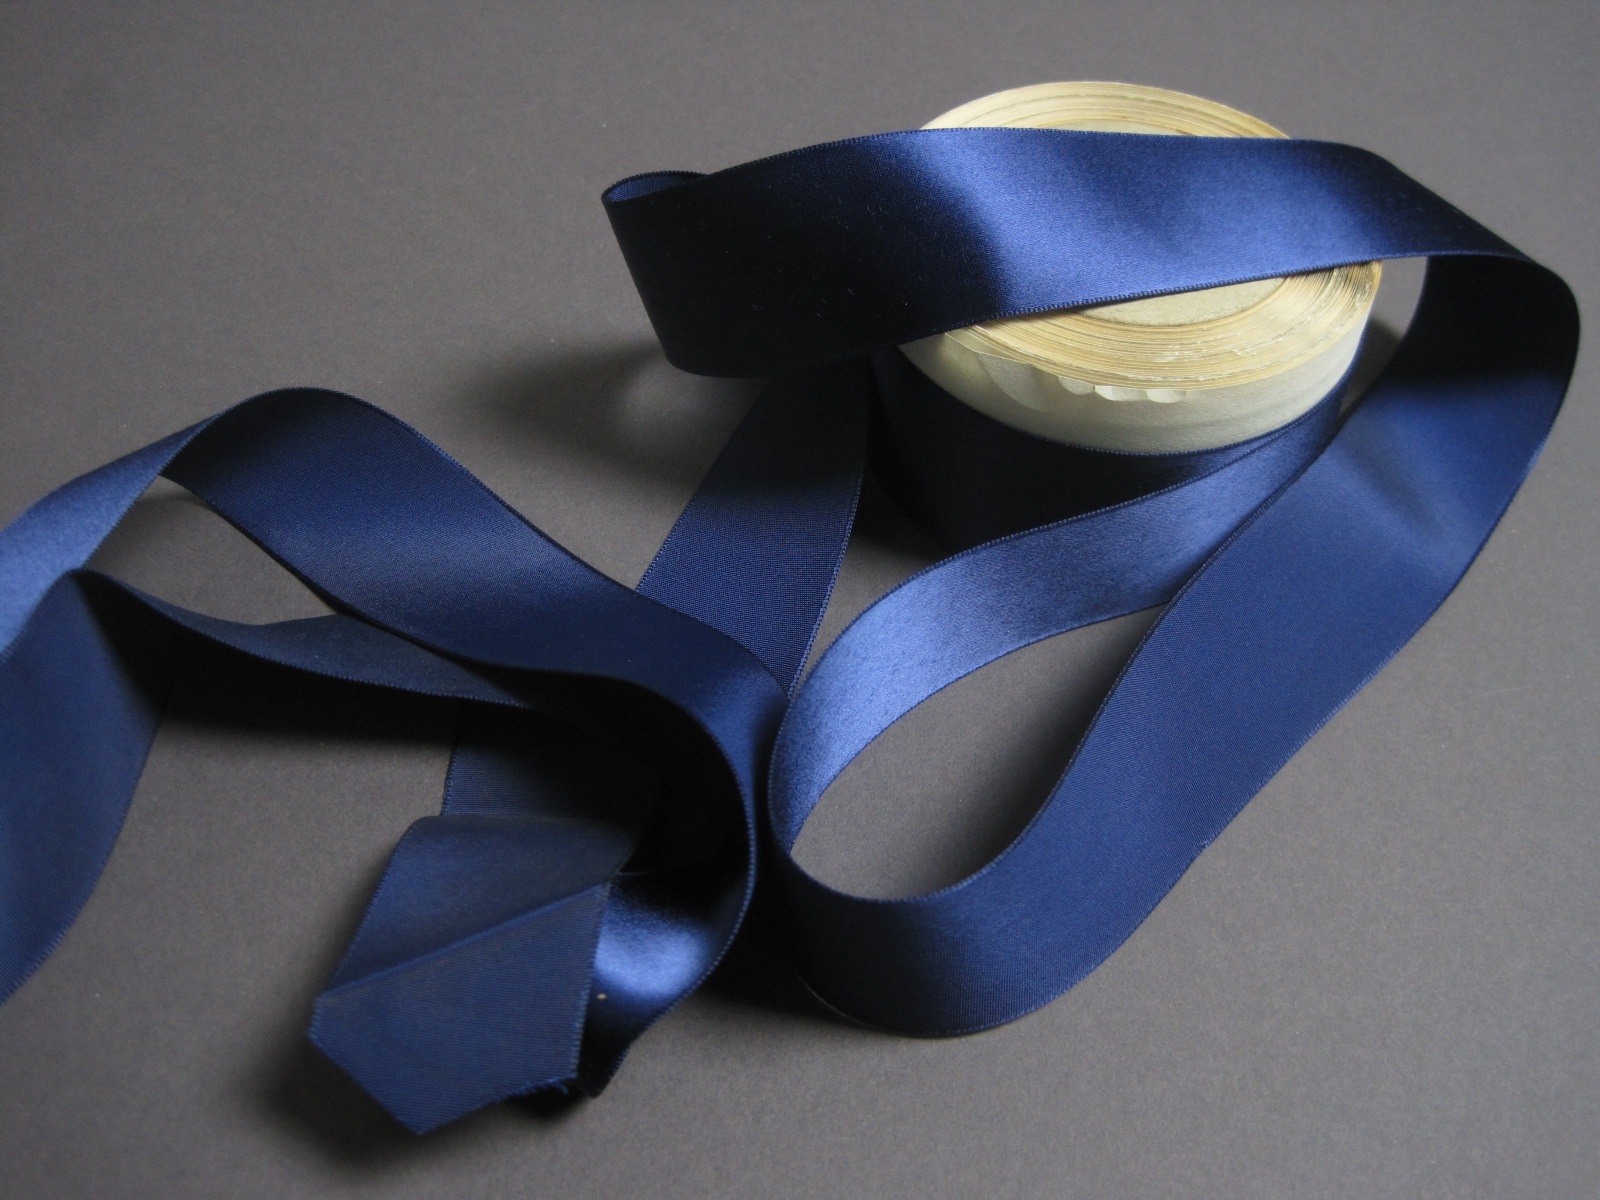 Vintage 30s Navy blue satin ribbon rayon 1.5 inch wide